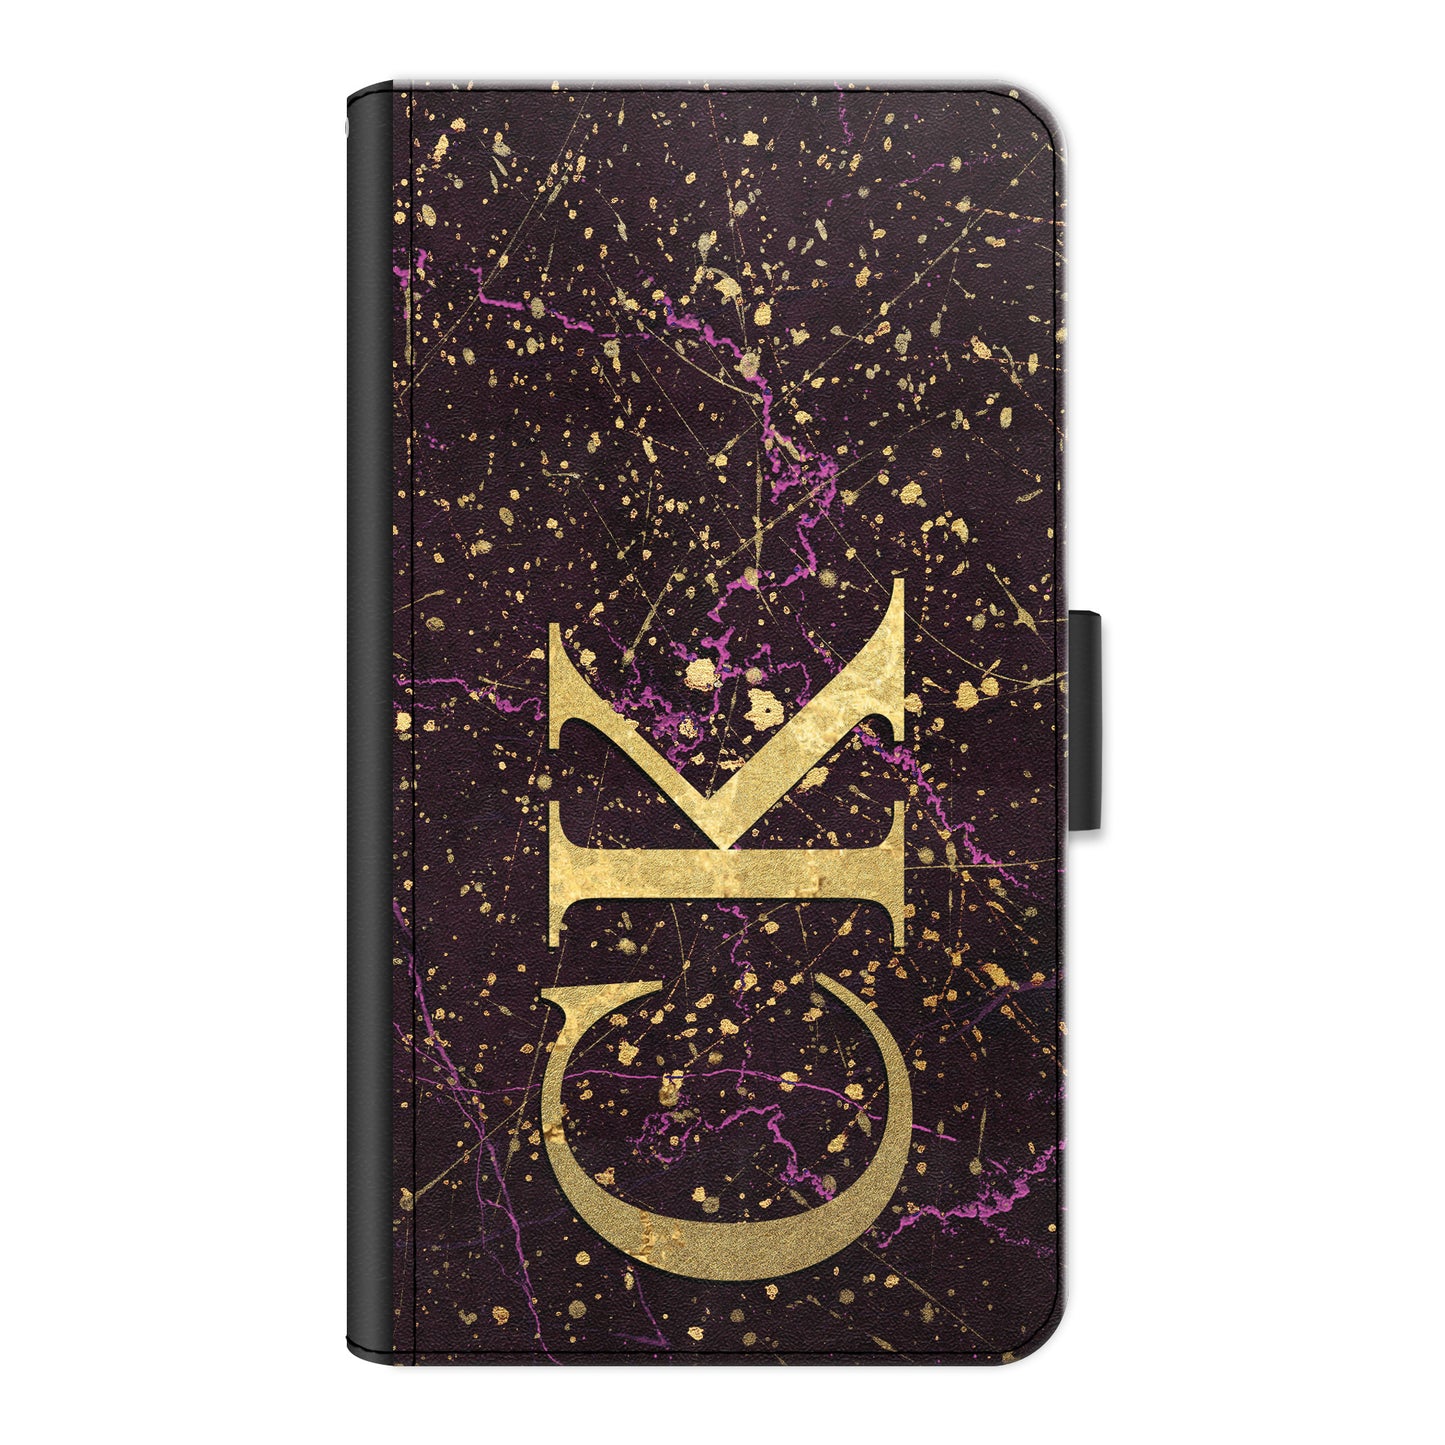 Personalised Nokia Phone Leather Wallet with Gold Initials on Pink and Gold Infused Black Marble